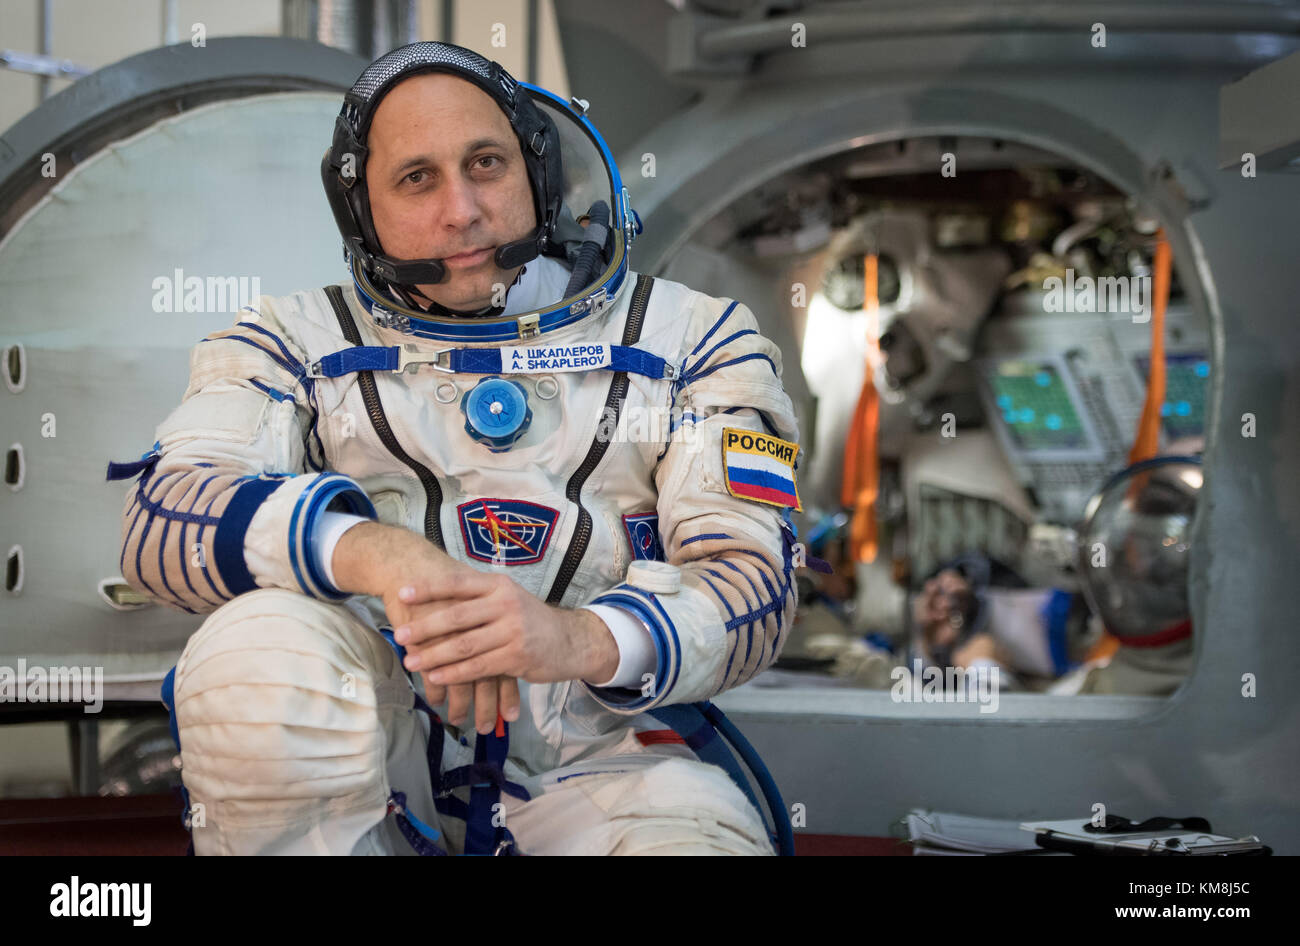 NASA International Space Station Expedition 53 backup crew member Russian cosmonaut Anton Shkaplerov of Roscosmos waits to enter the Soyuz MS-06 spacecraft simulator during during his Soyuz qualification exams at the Gagarin Cosmonaut Training Center August 30, 2017 in Star City, Russia. (photo by Bill Ingalls  via Planetpix) Stock Photo